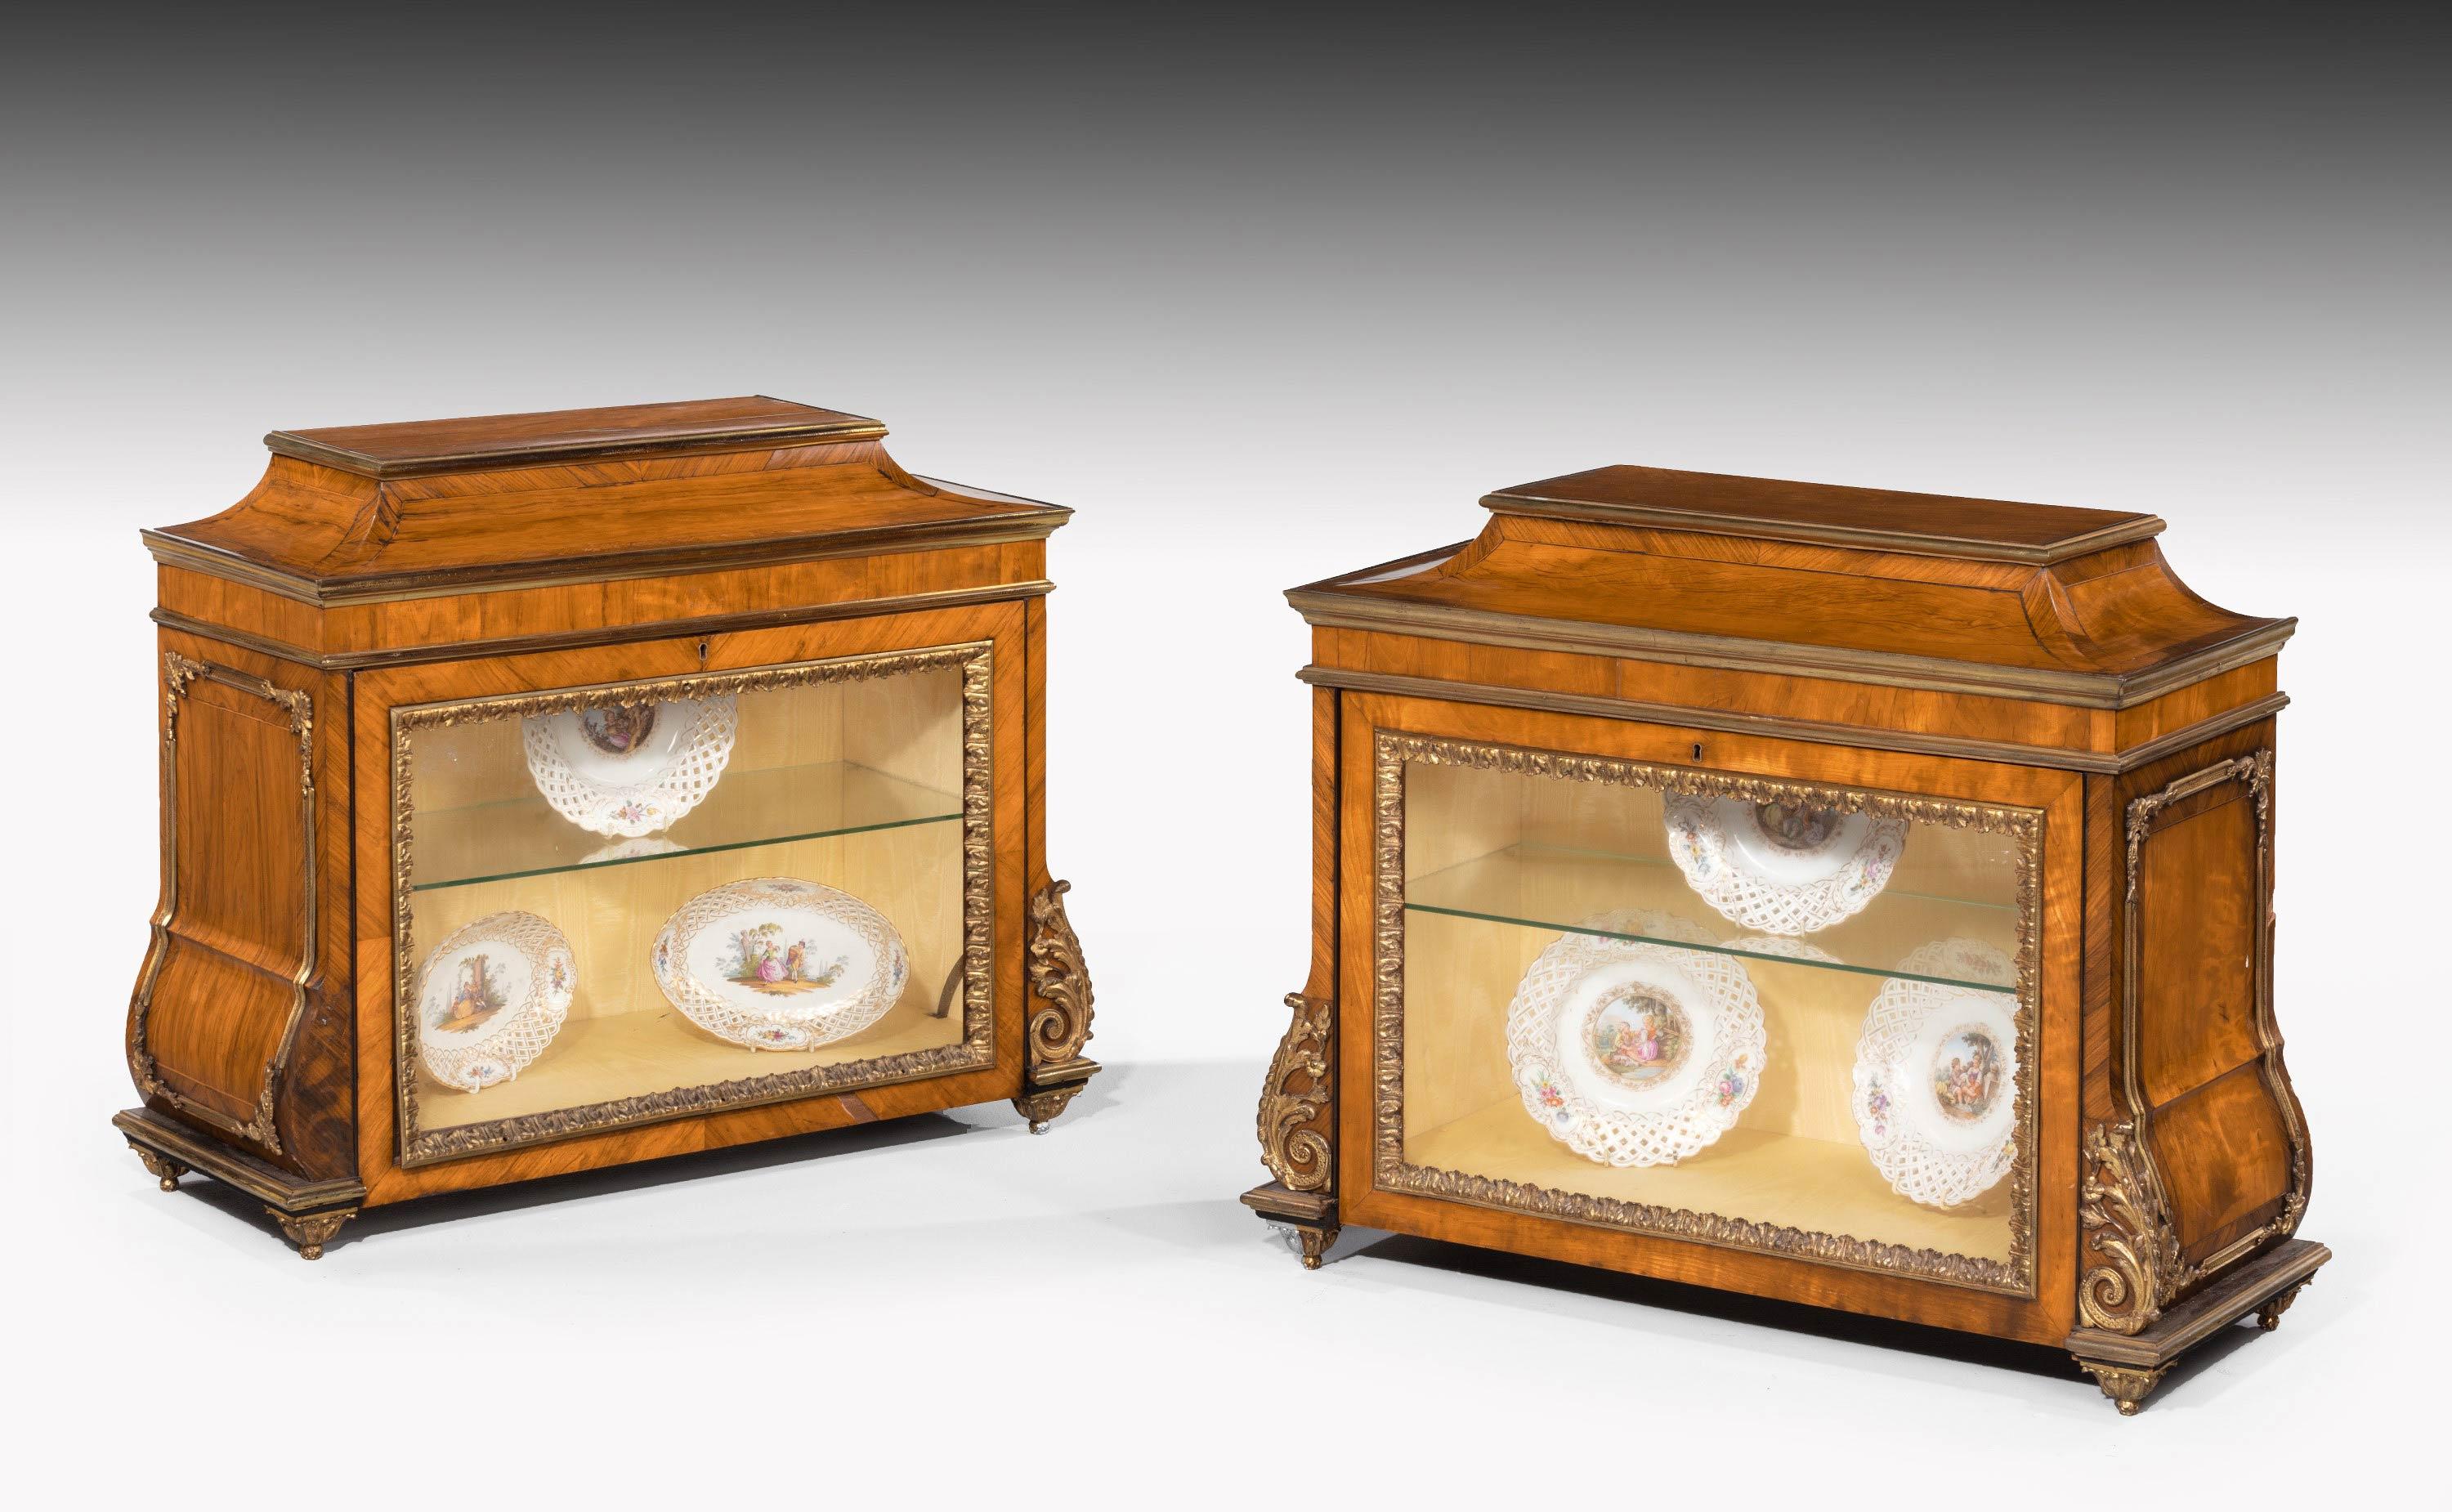 Rare Pair of George III Period Kingwood Table Cabinets In Good Condition For Sale In Peterborough, Northamptonshire